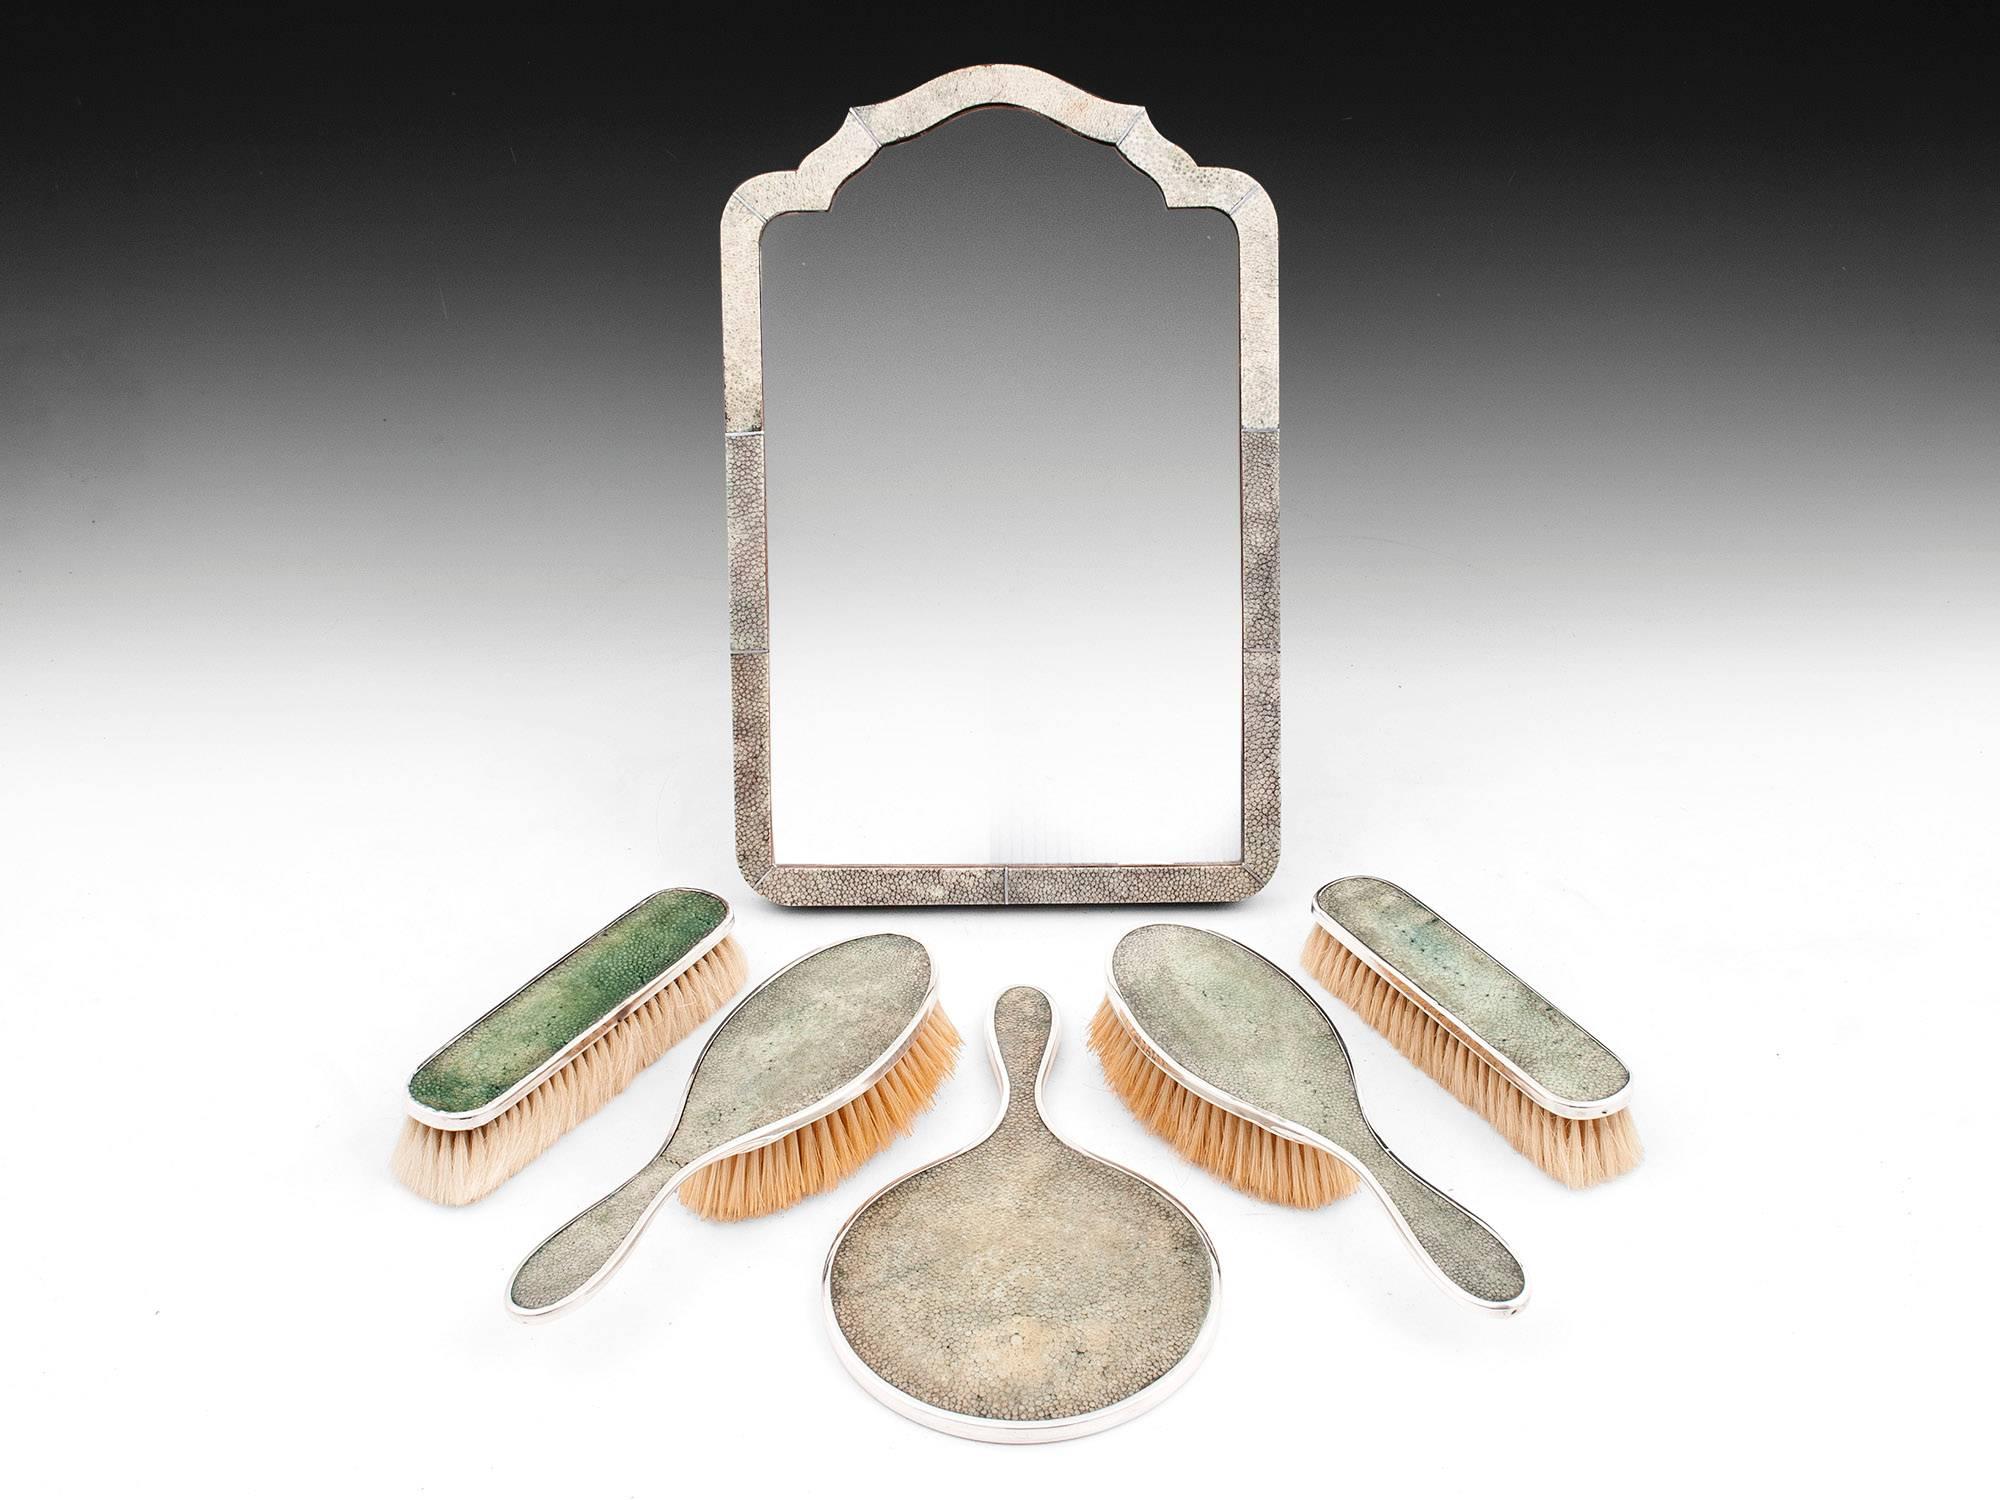 Art Deco Shagreen Brush and Mirror Dresser Set by Horton & Allday For Sale 1